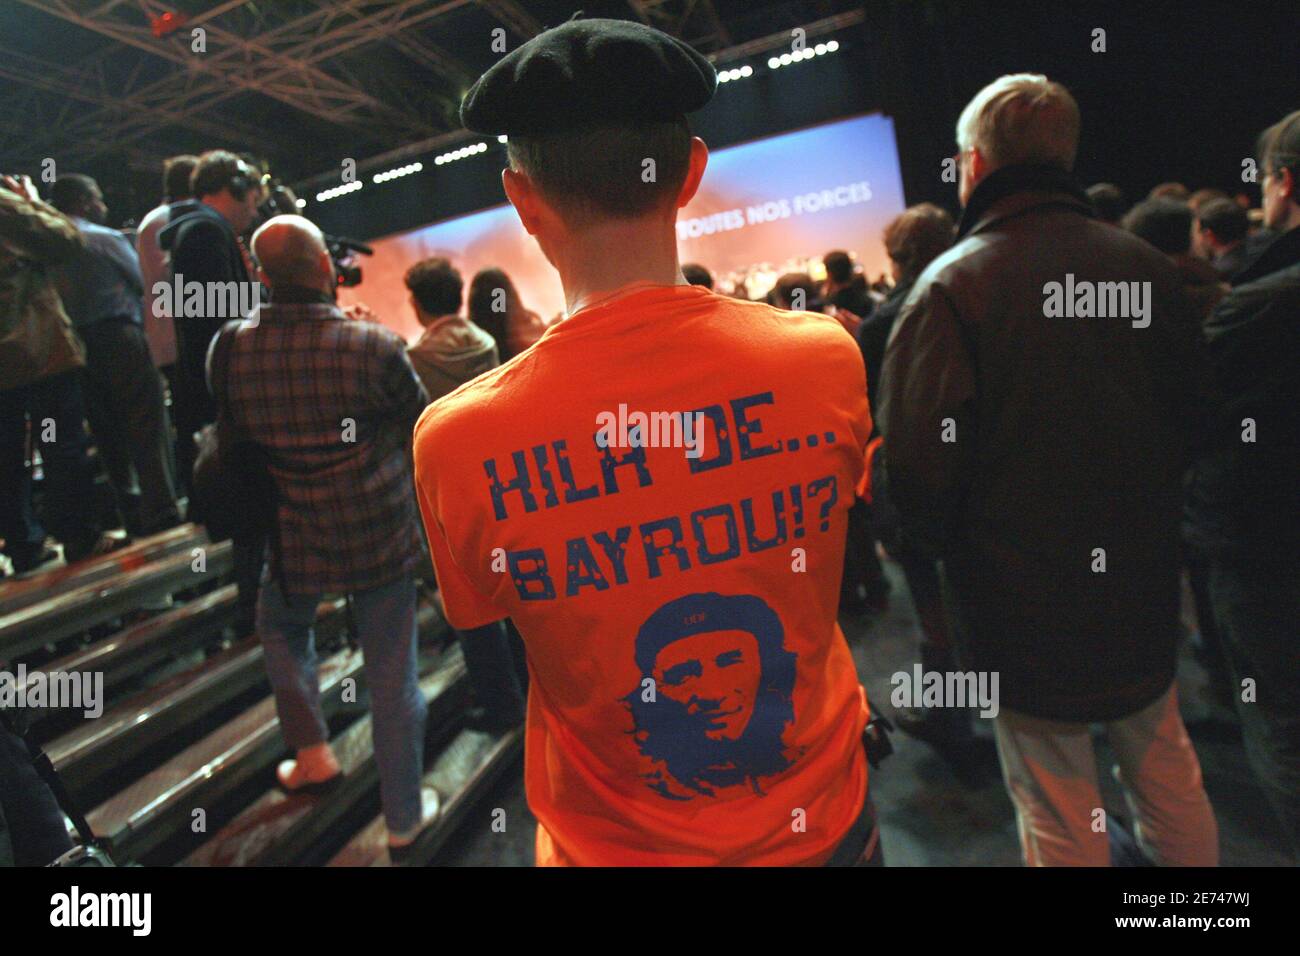 A supporter wearing an orange tee-shirt attends Union for the French Democraty (UDF) centrist party president and candidate for the upcoming 2007 presidential elections Francois Bayrou during a campaign meeting held at the Zenith in Paris.France, on March 21, 2007. Photo by Corentin Fohlen/ABACAPRESS.COM Stock Photo